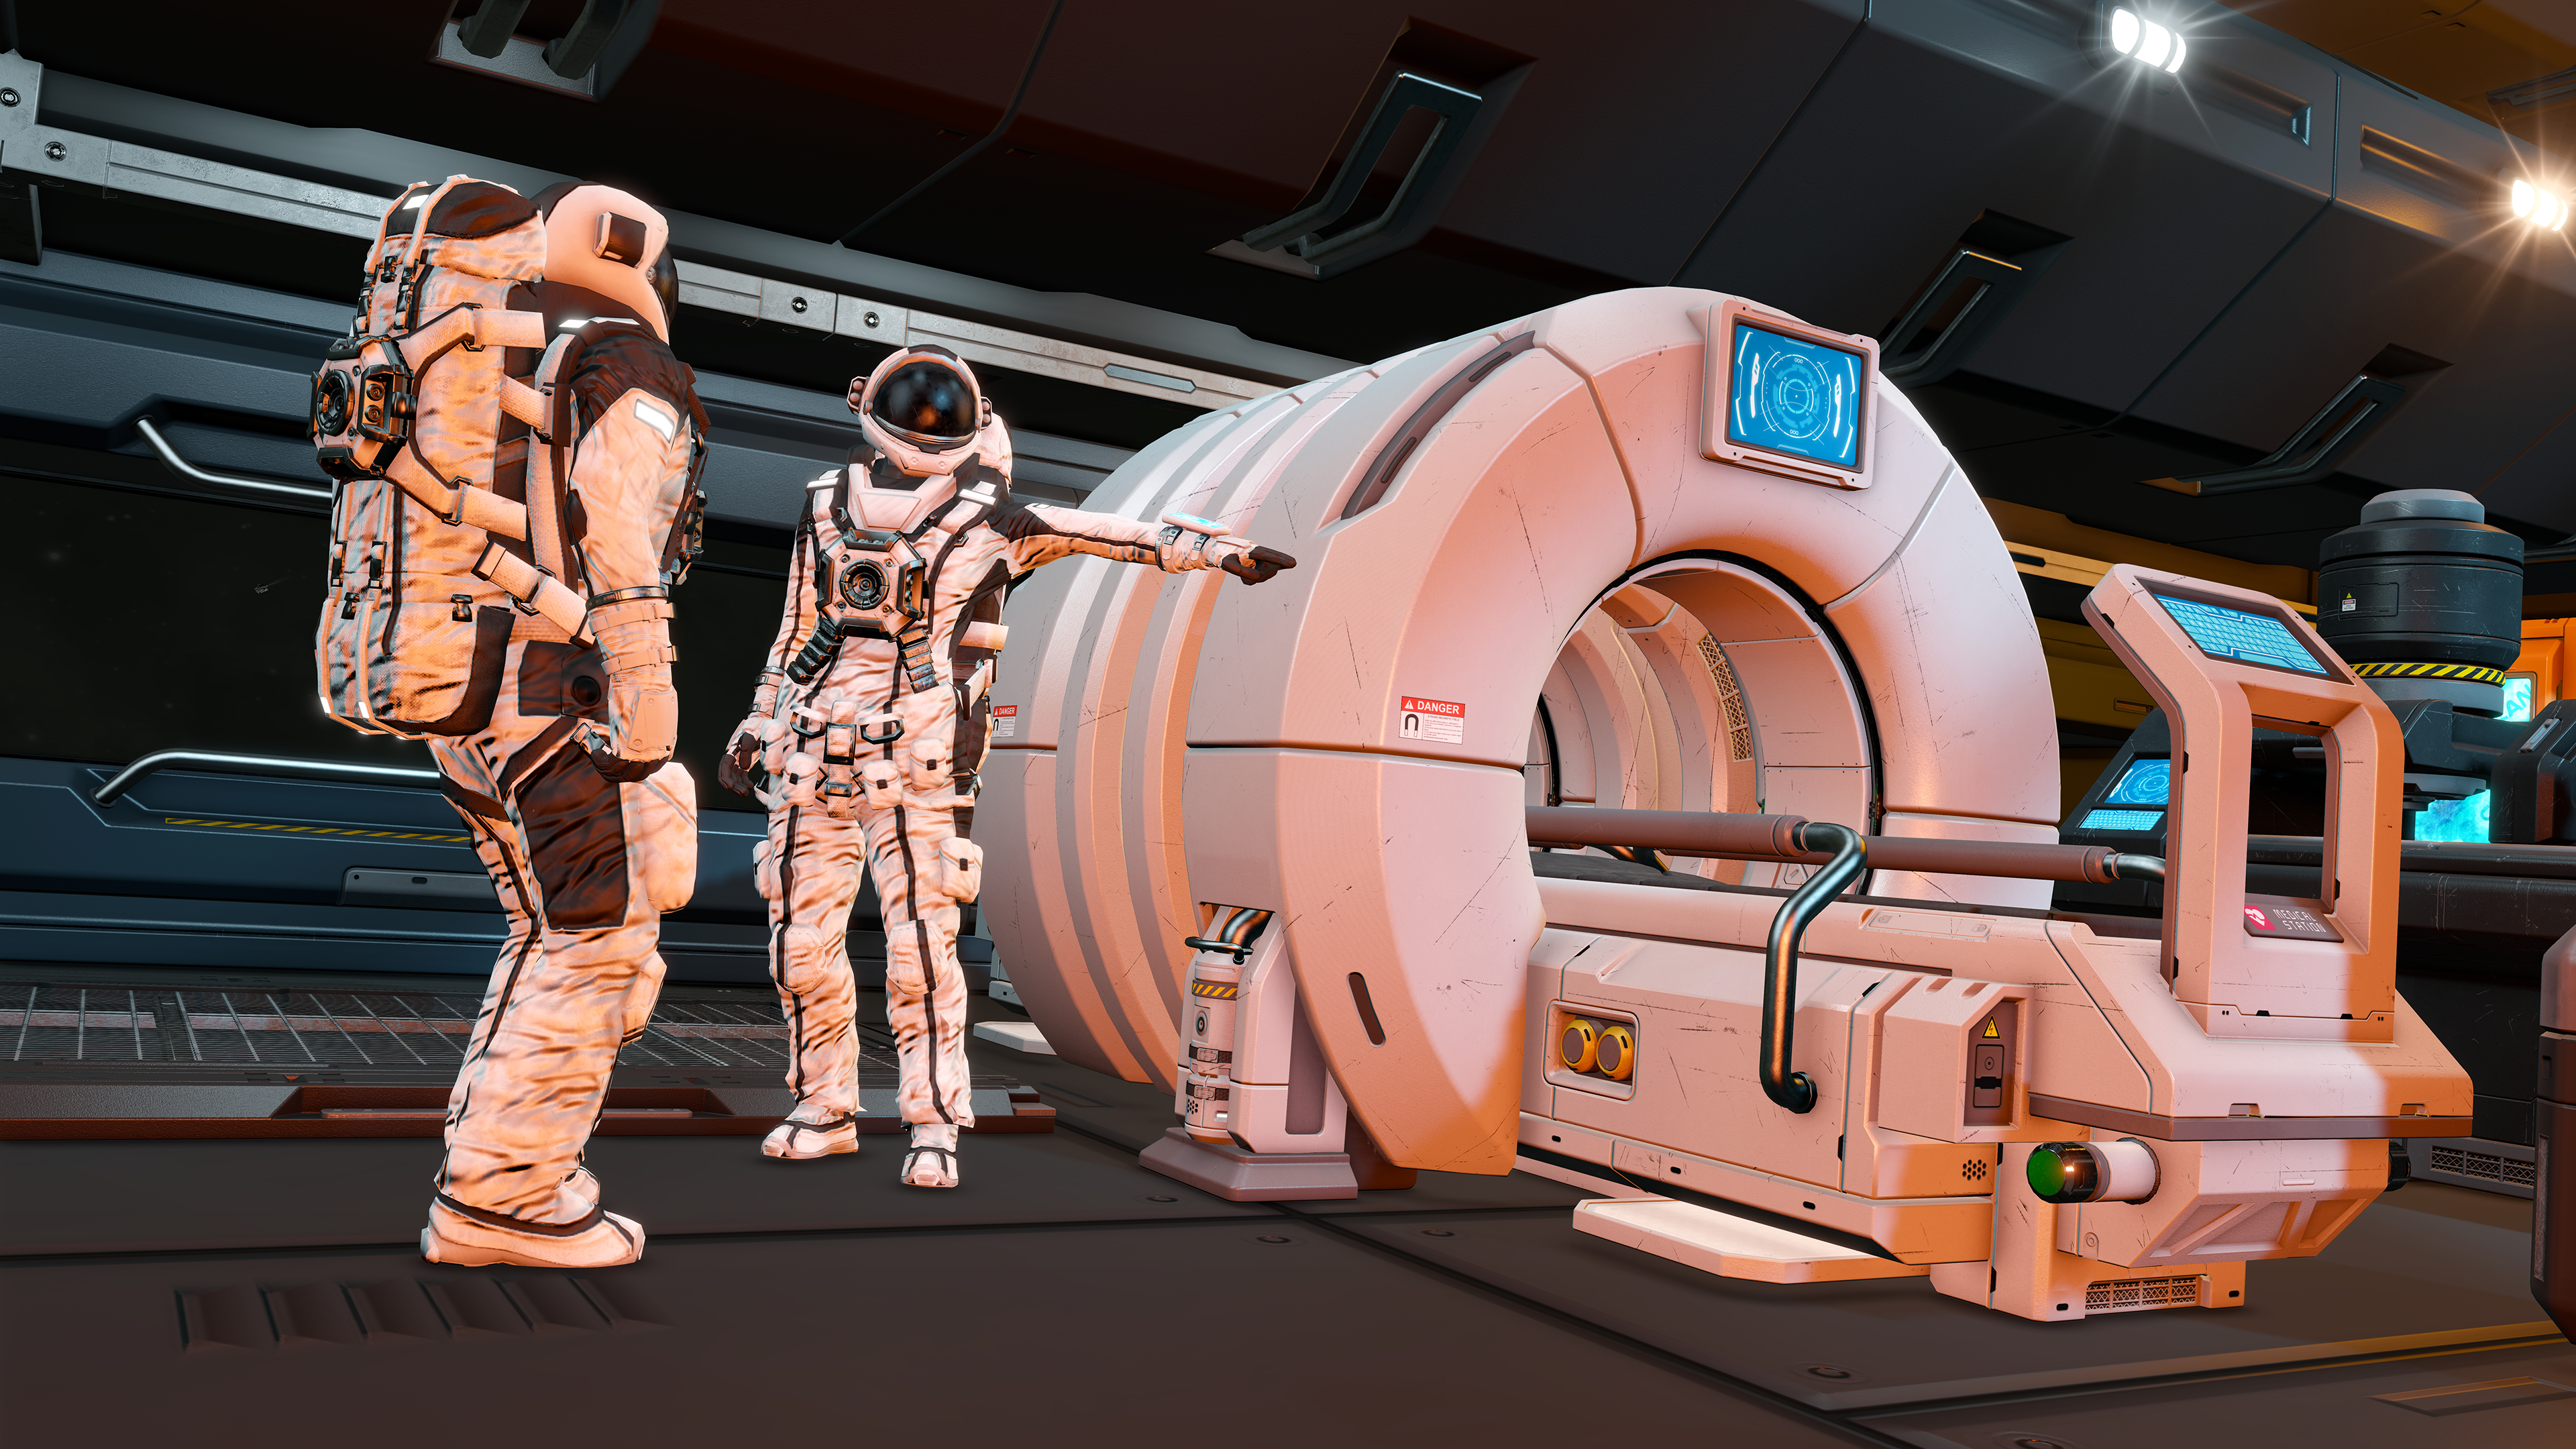 HD desktop wallpaper featuring two space engineers near a futuristic machine, ideal for a space-themed background.